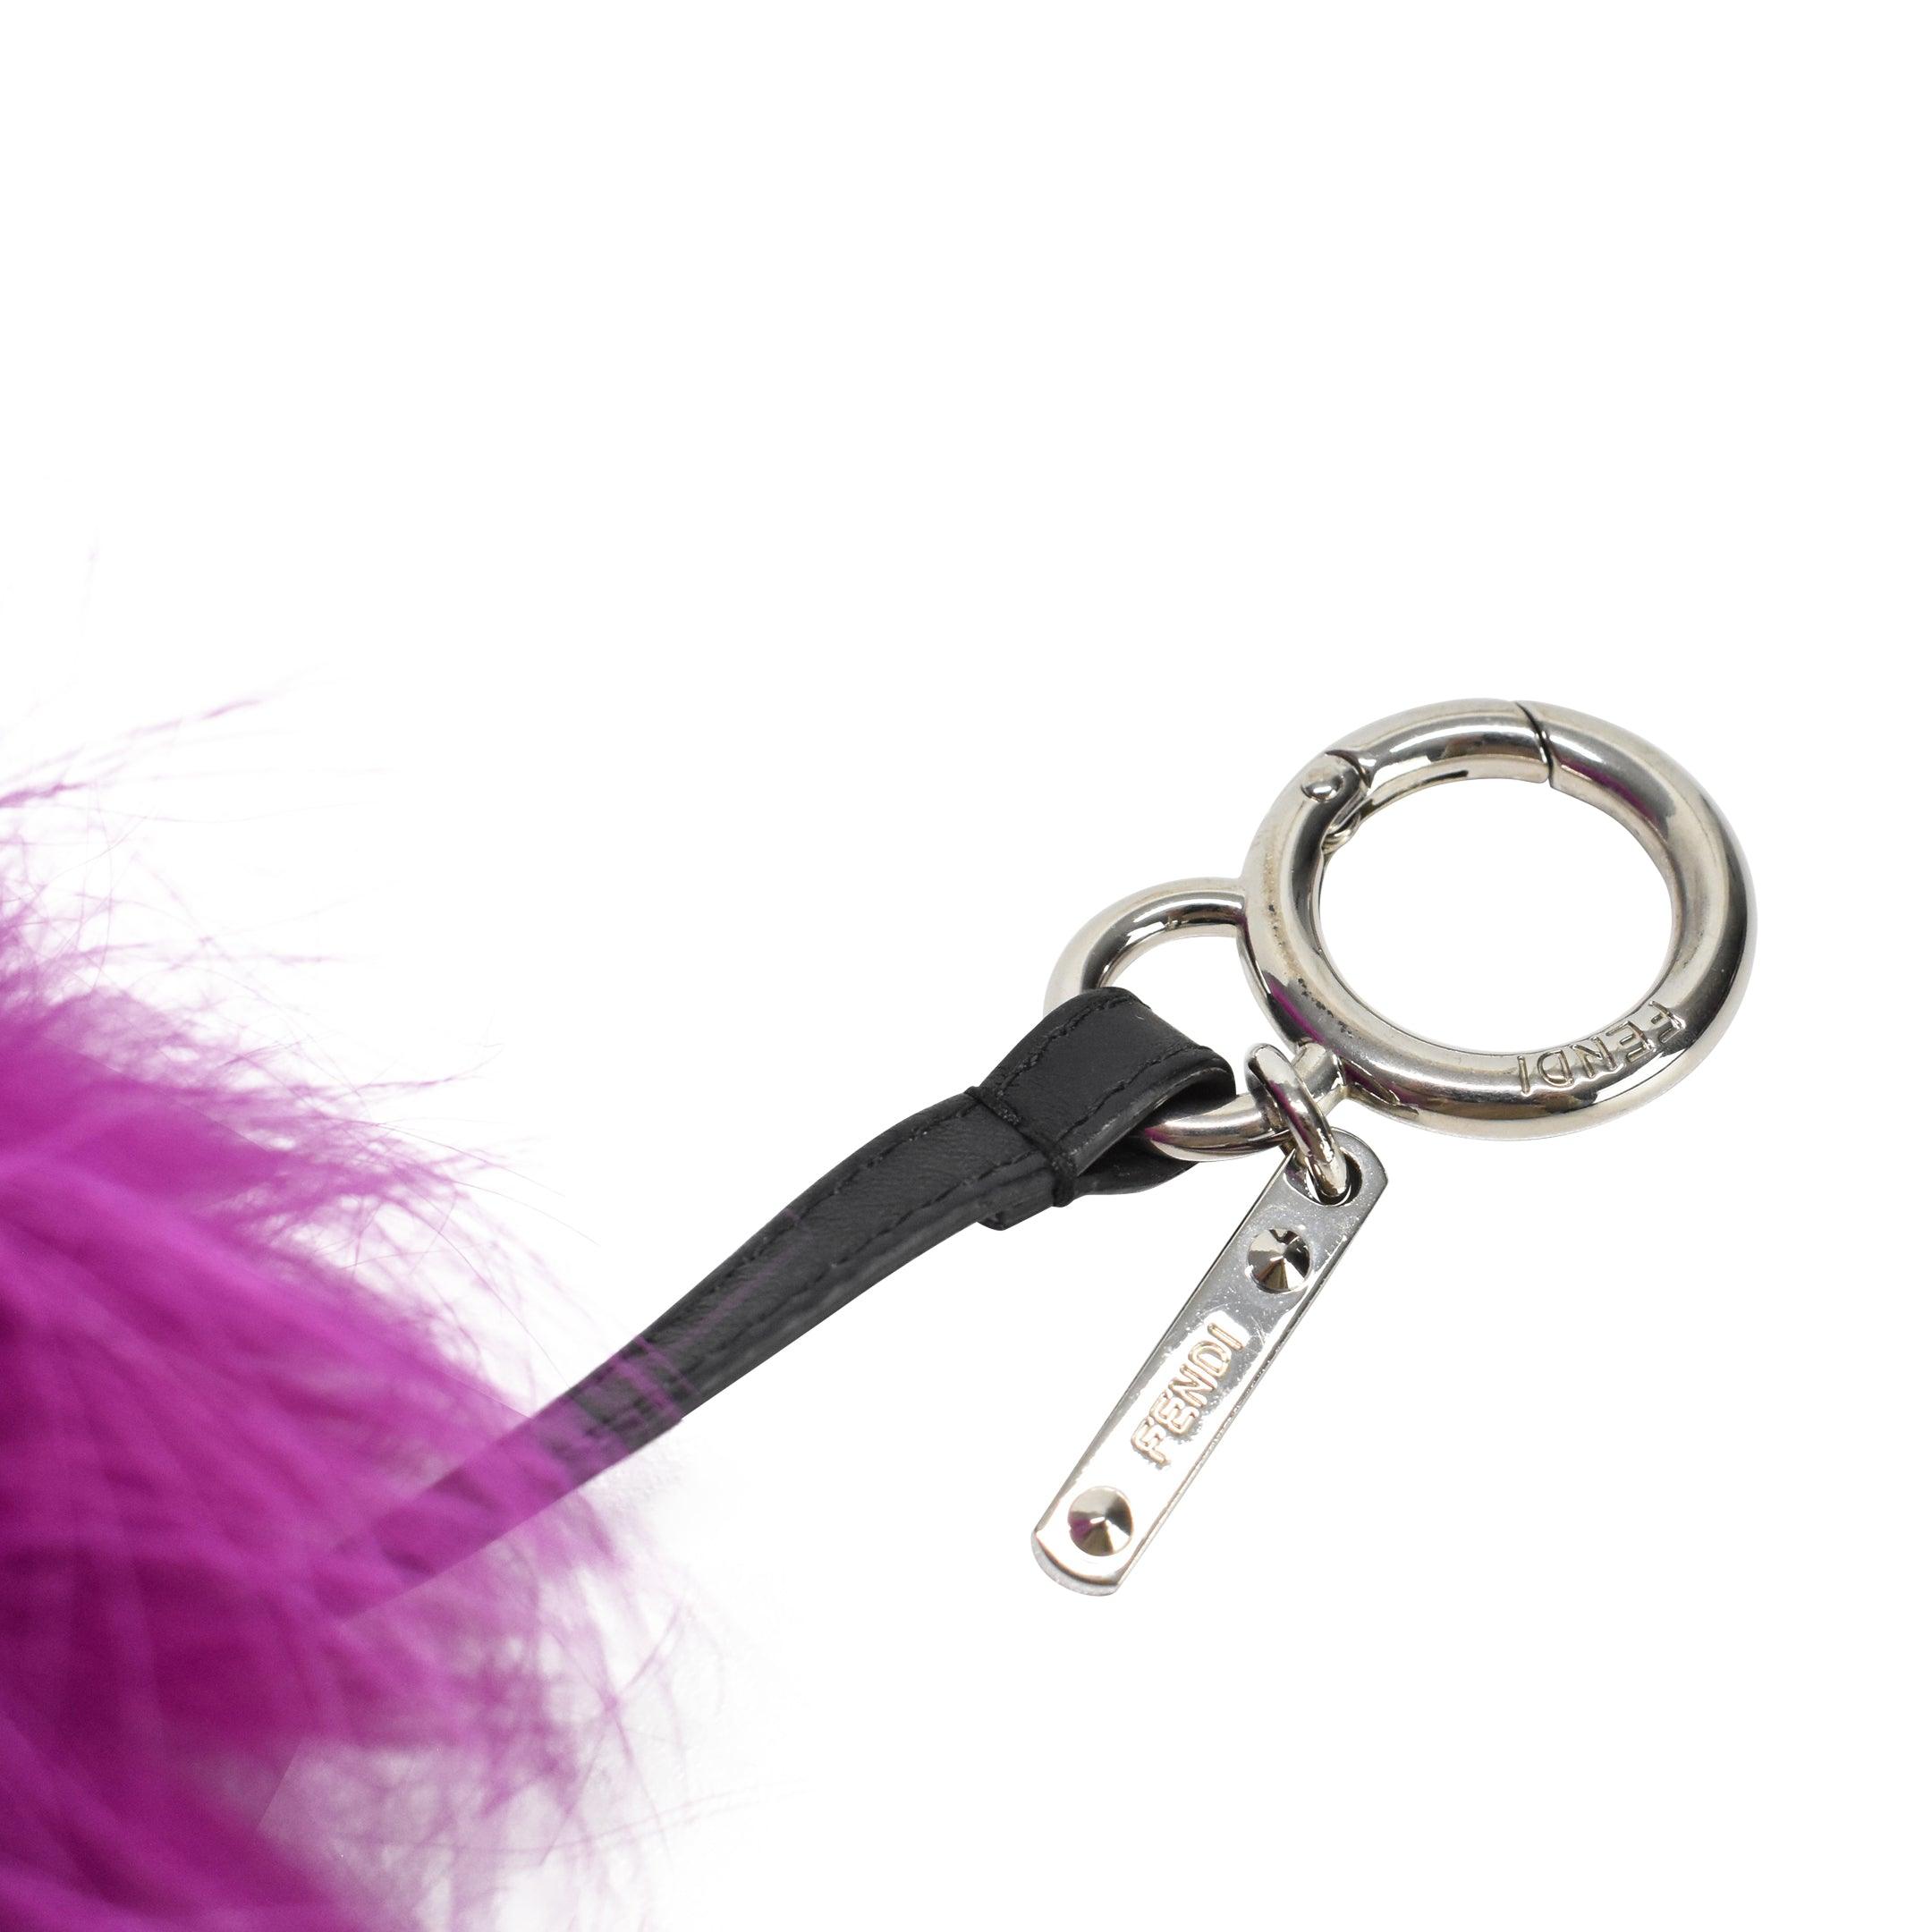 Fendi Monster Key Chain - Fashionably Yours